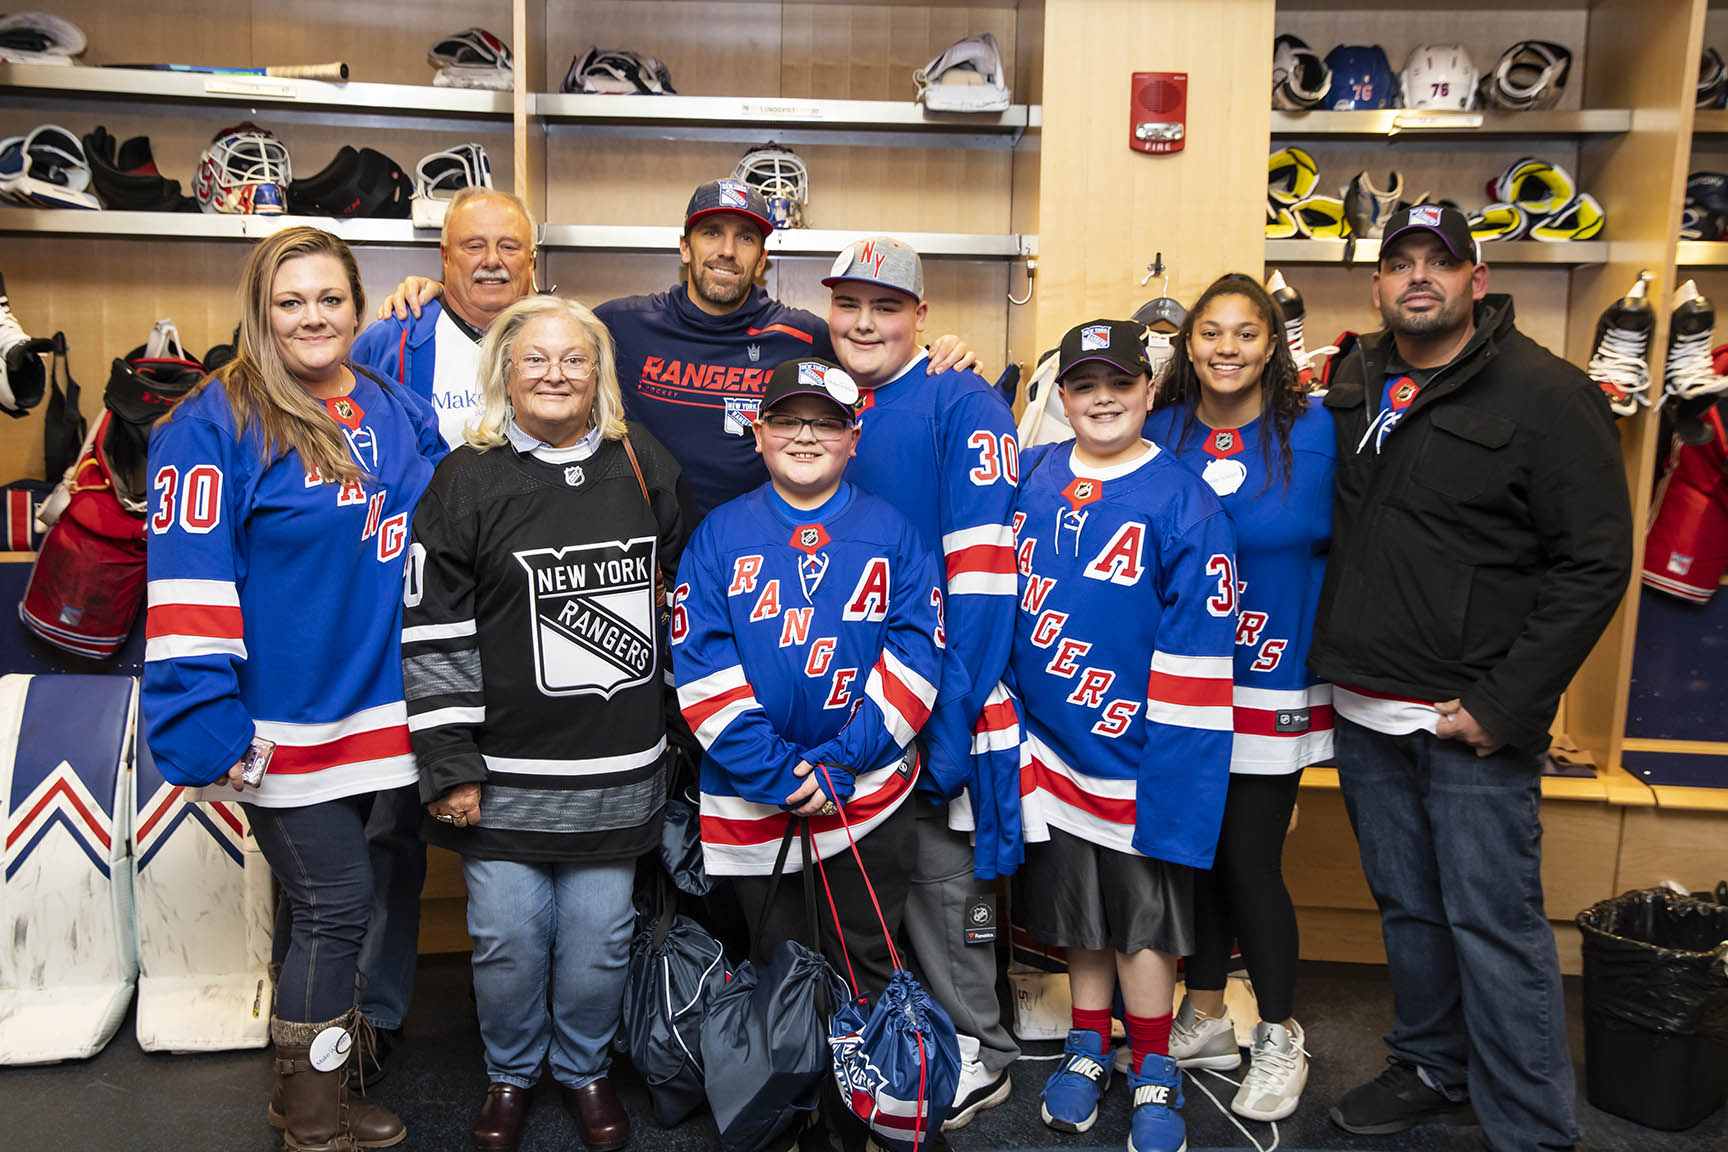 In February 2019 CJ from Make A Wish Suffolk had his wish come true when he met with Henrik at Casino night and post a NYR game. He says no matter the health obstacles he faces, the NYR and his favorite player Henrik always makes him smile.